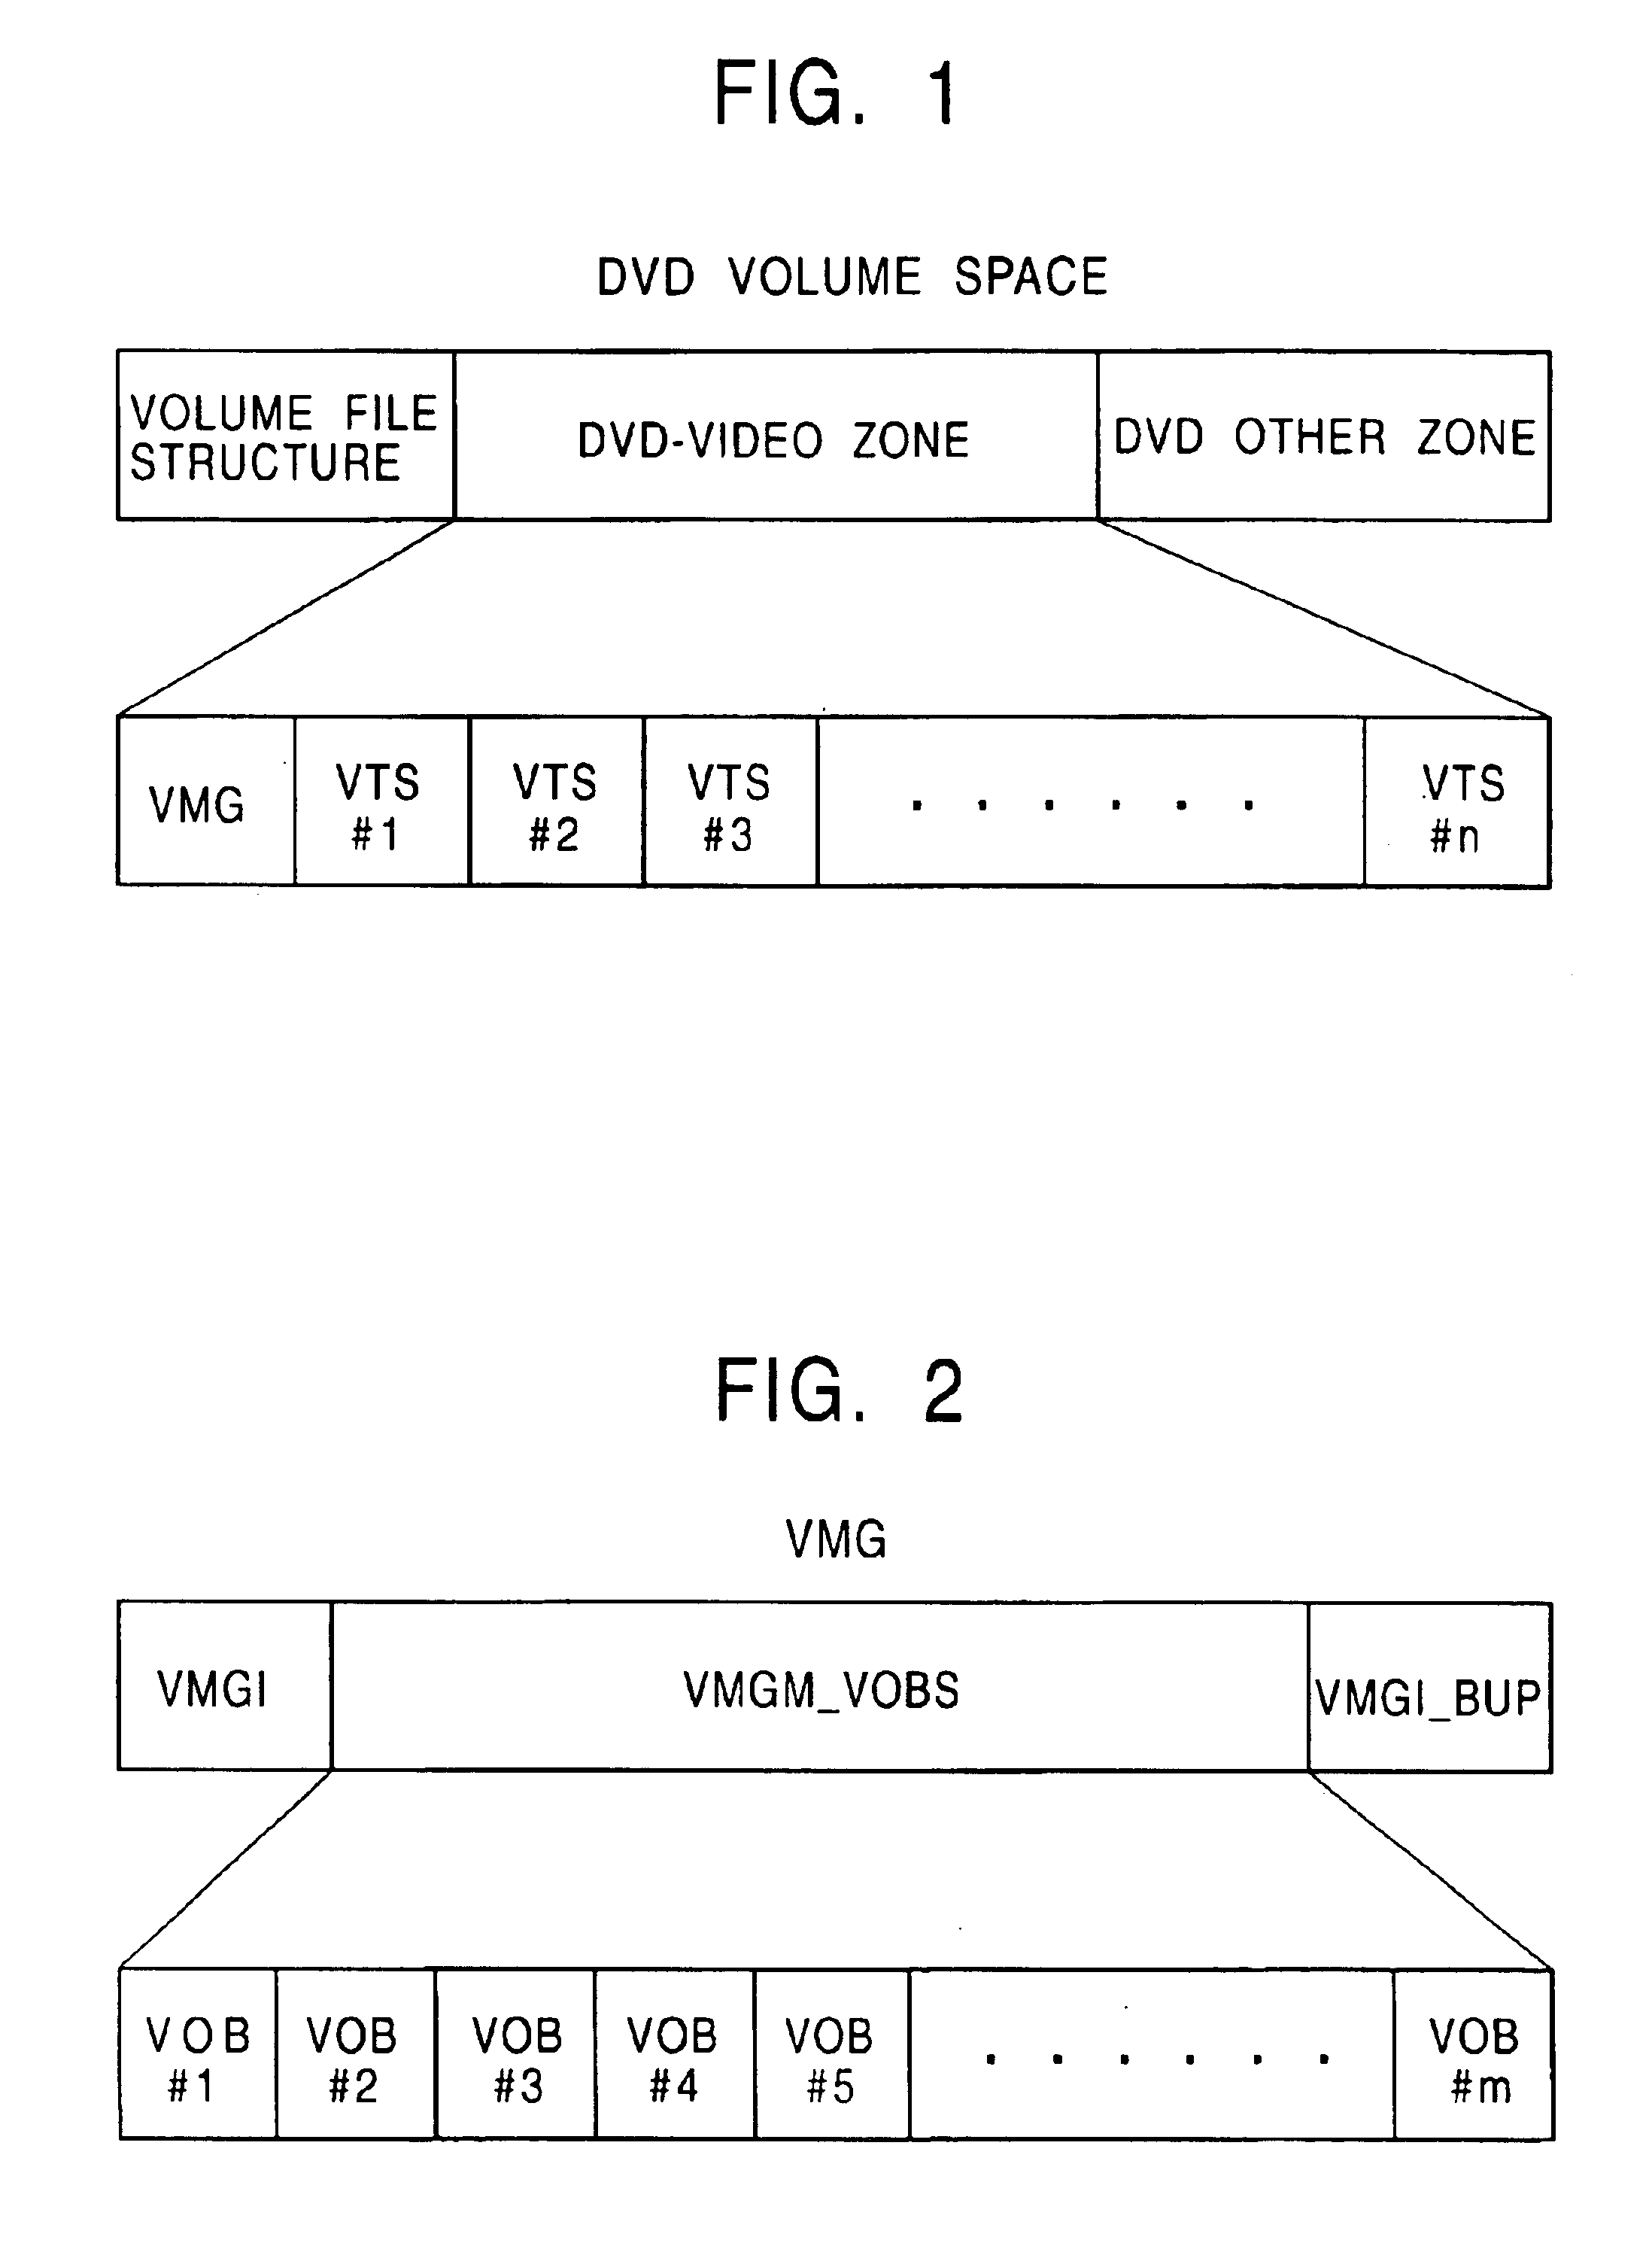 Disk player with location marking capability